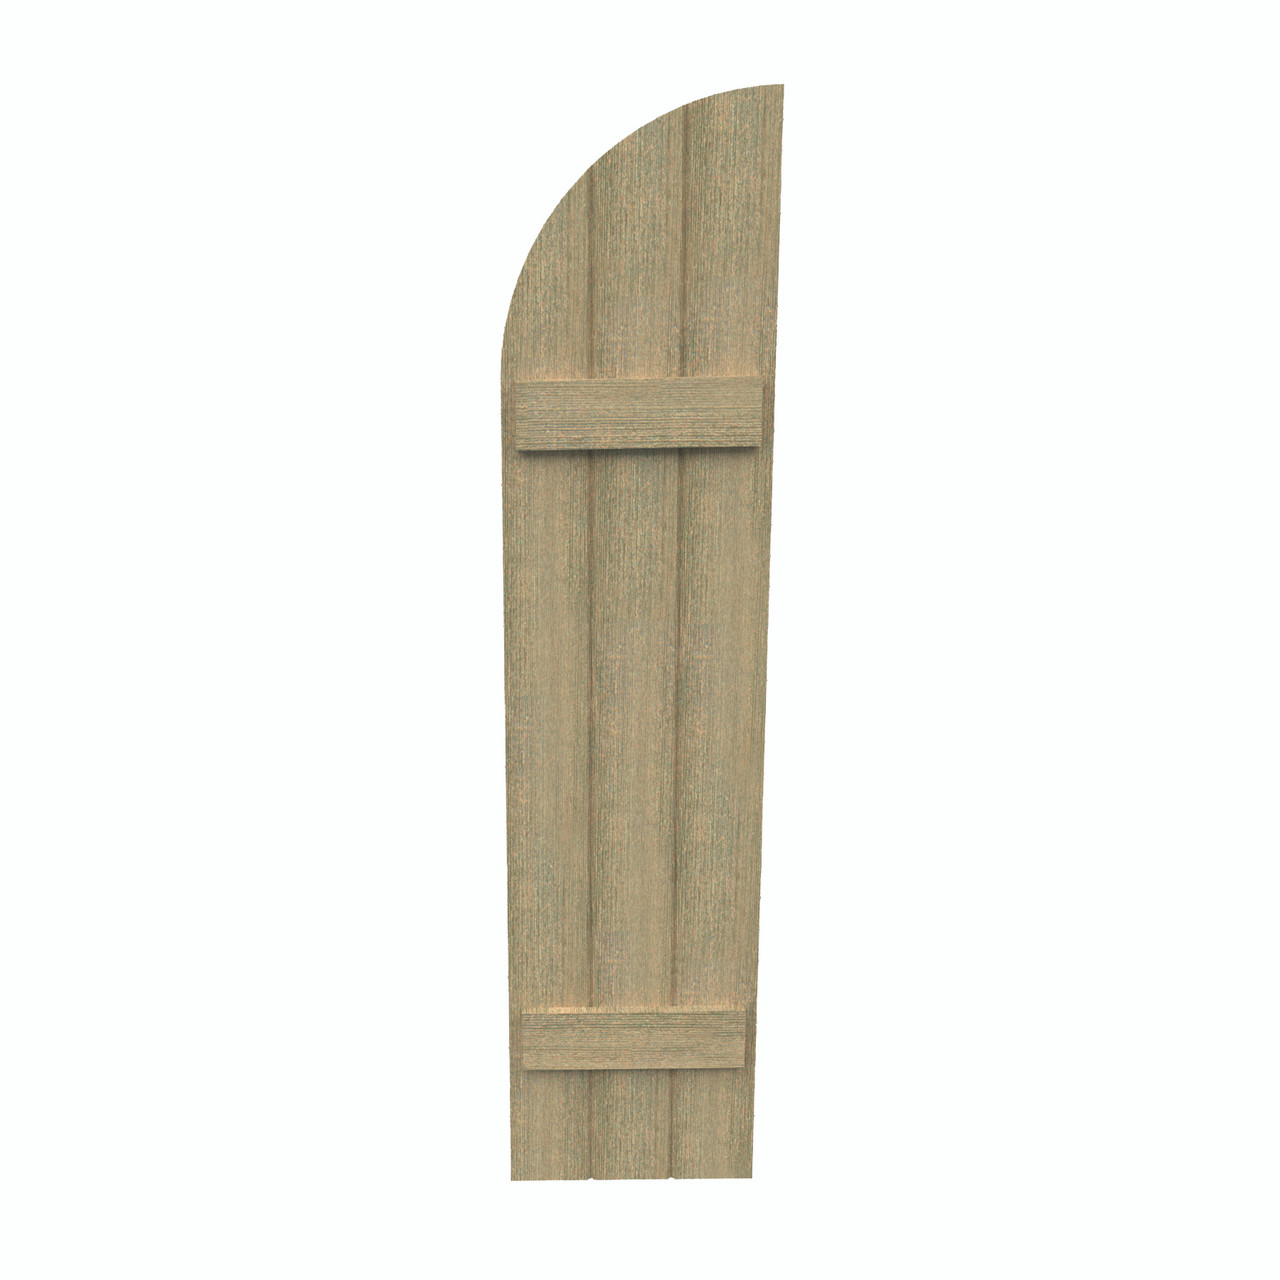 14 inch by 51 inch Quarter Round Shutter with 3-Boards